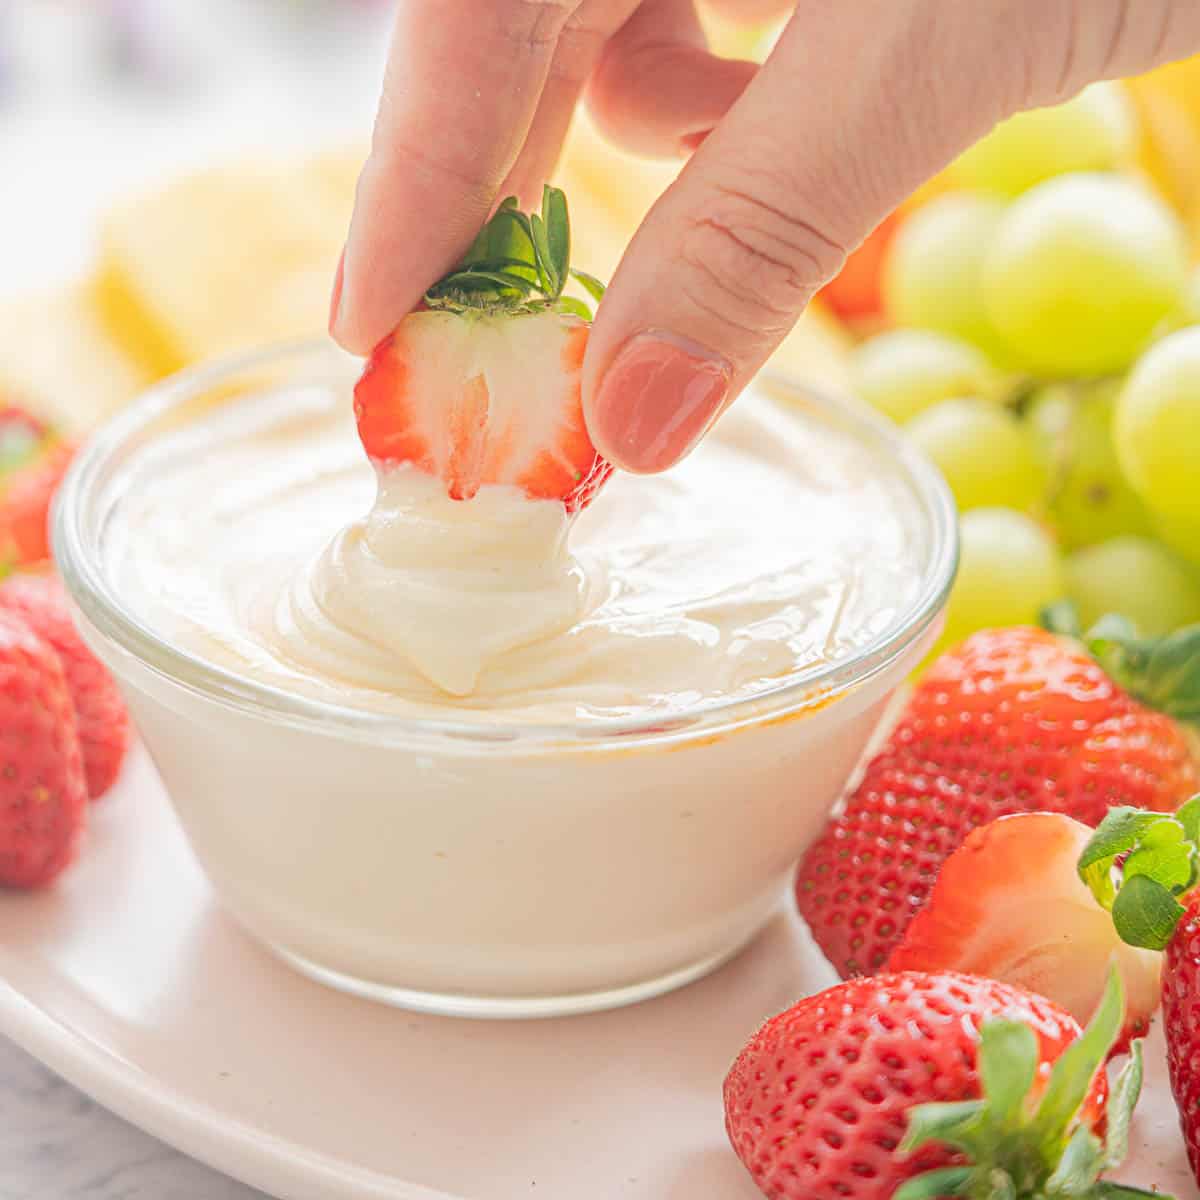 A strawberry being dunked into a glass bowl of Whipped Cottage Cheese surrounded by fresh fruit